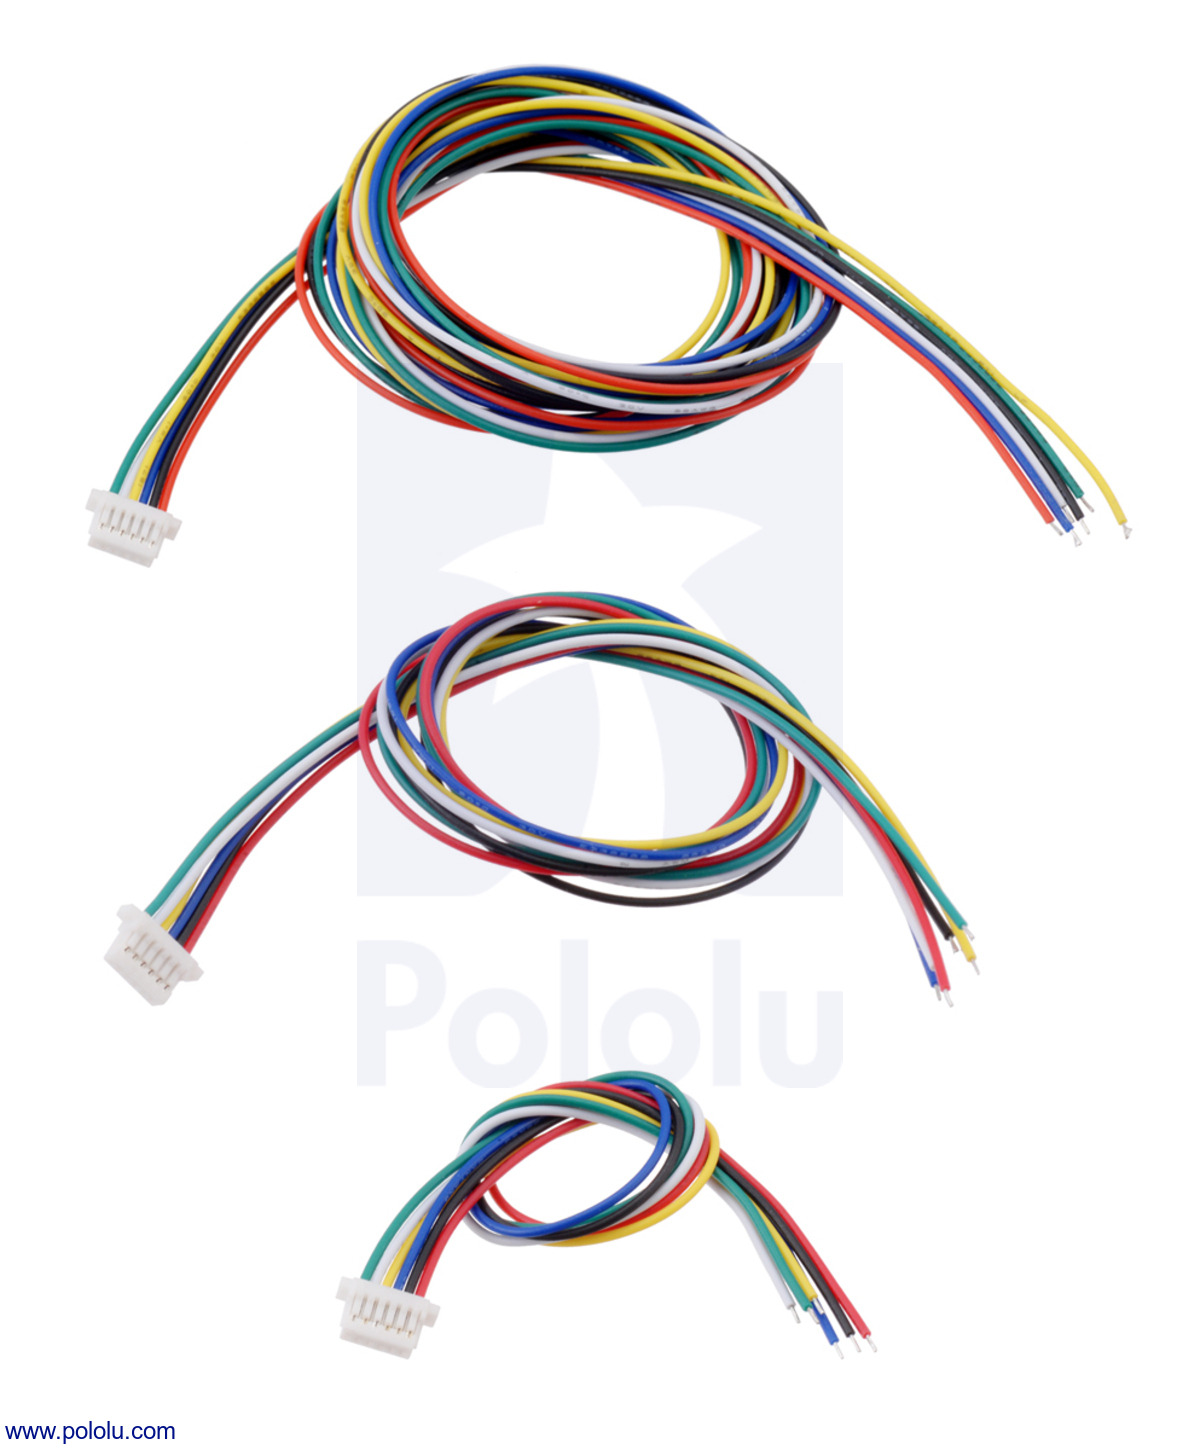 Cable RGB Standard Compatible All Terminal Arcade/Converter Video Harness 